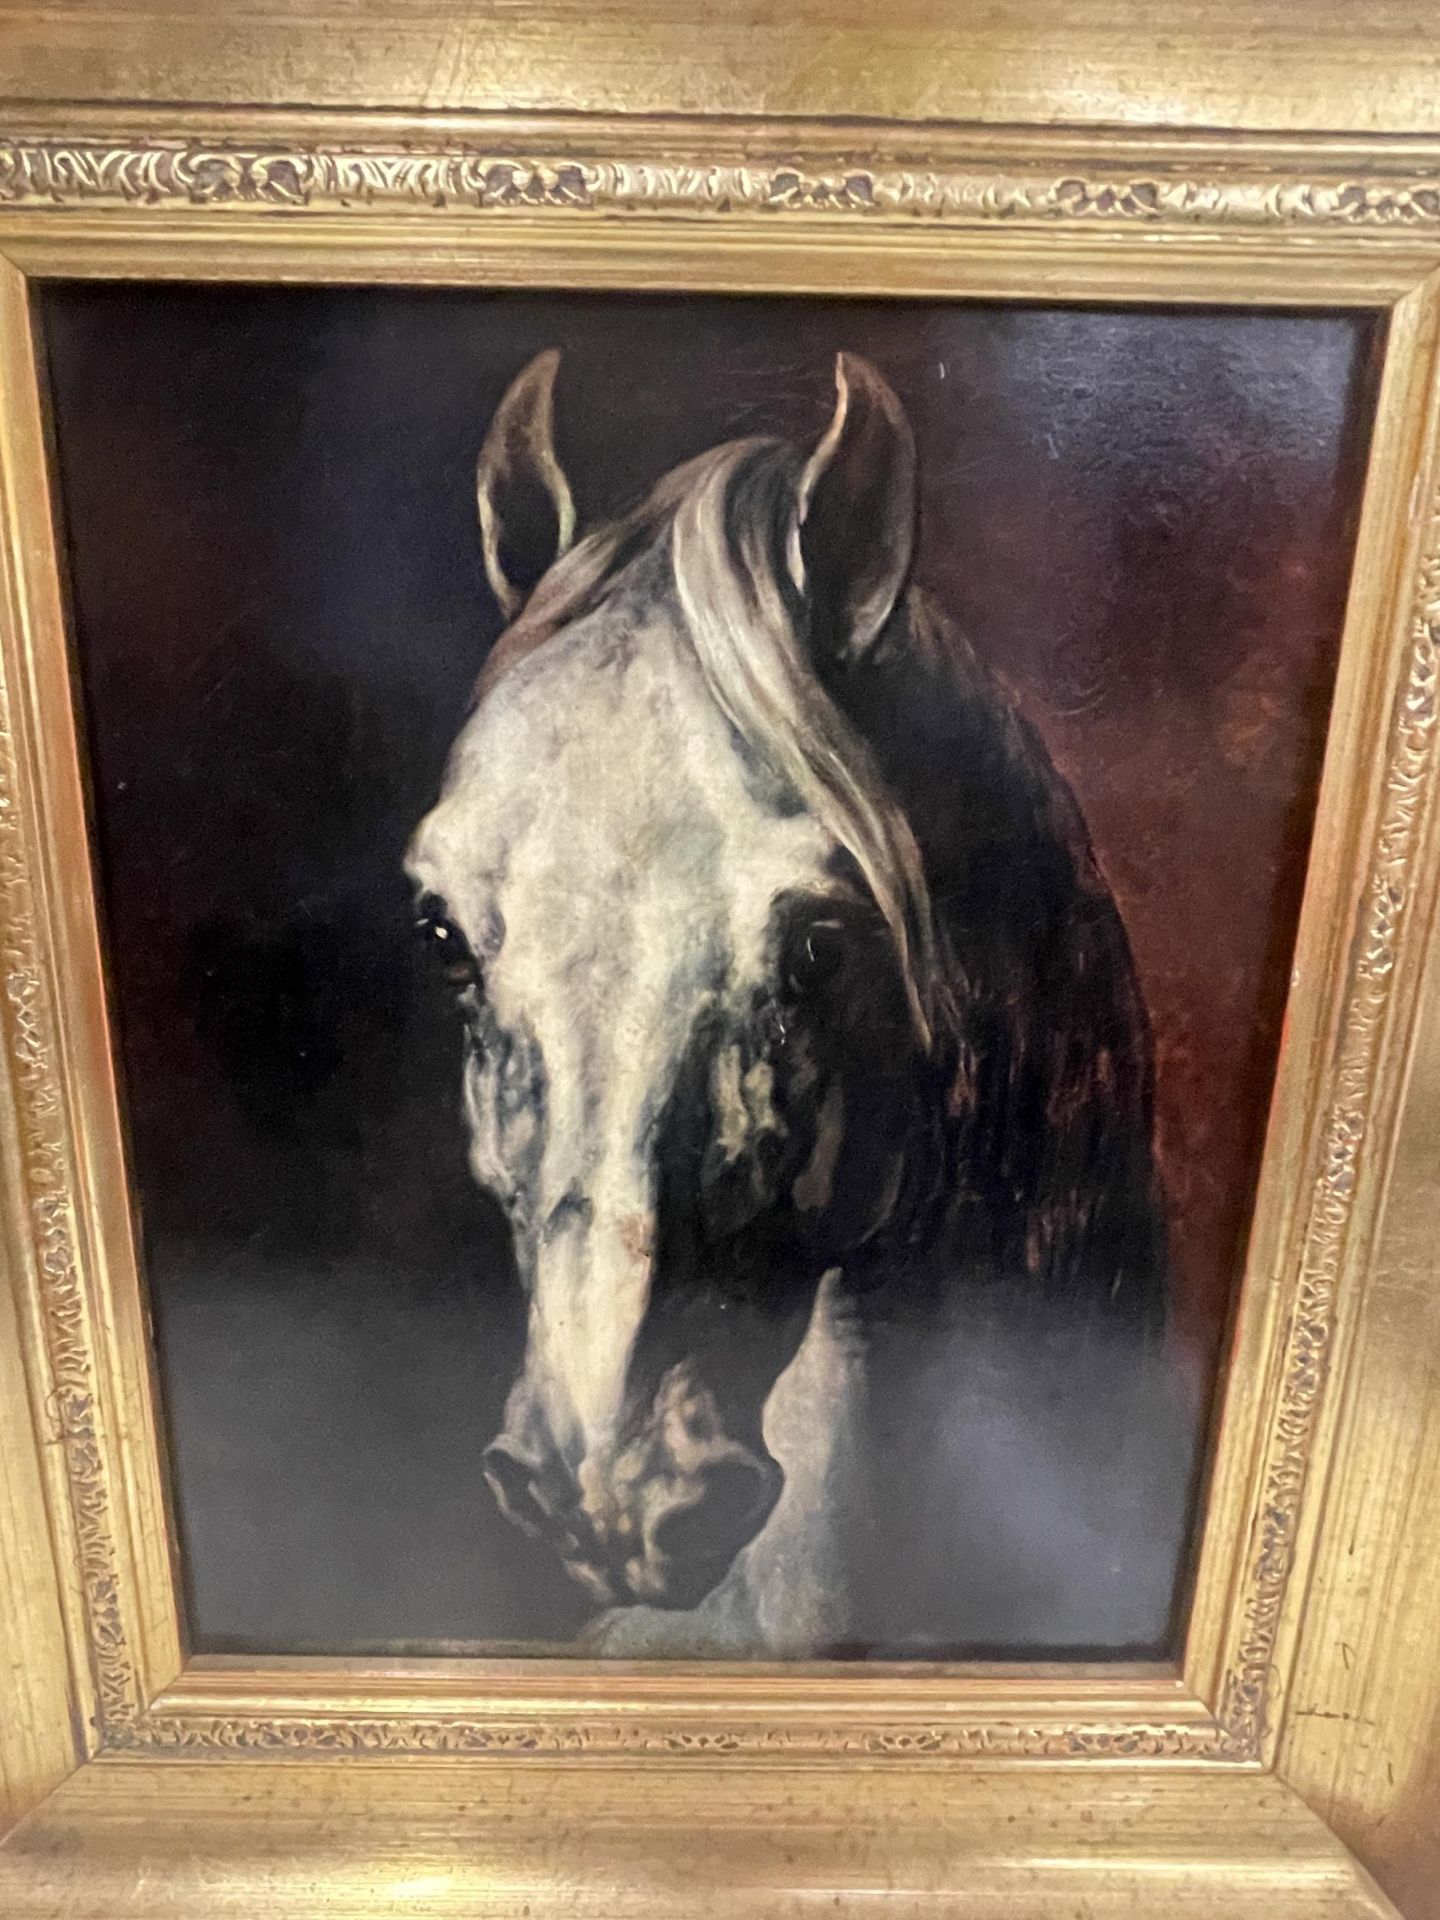 A GILT FRAMED PRINT OF A HORSE - Image 2 of 3